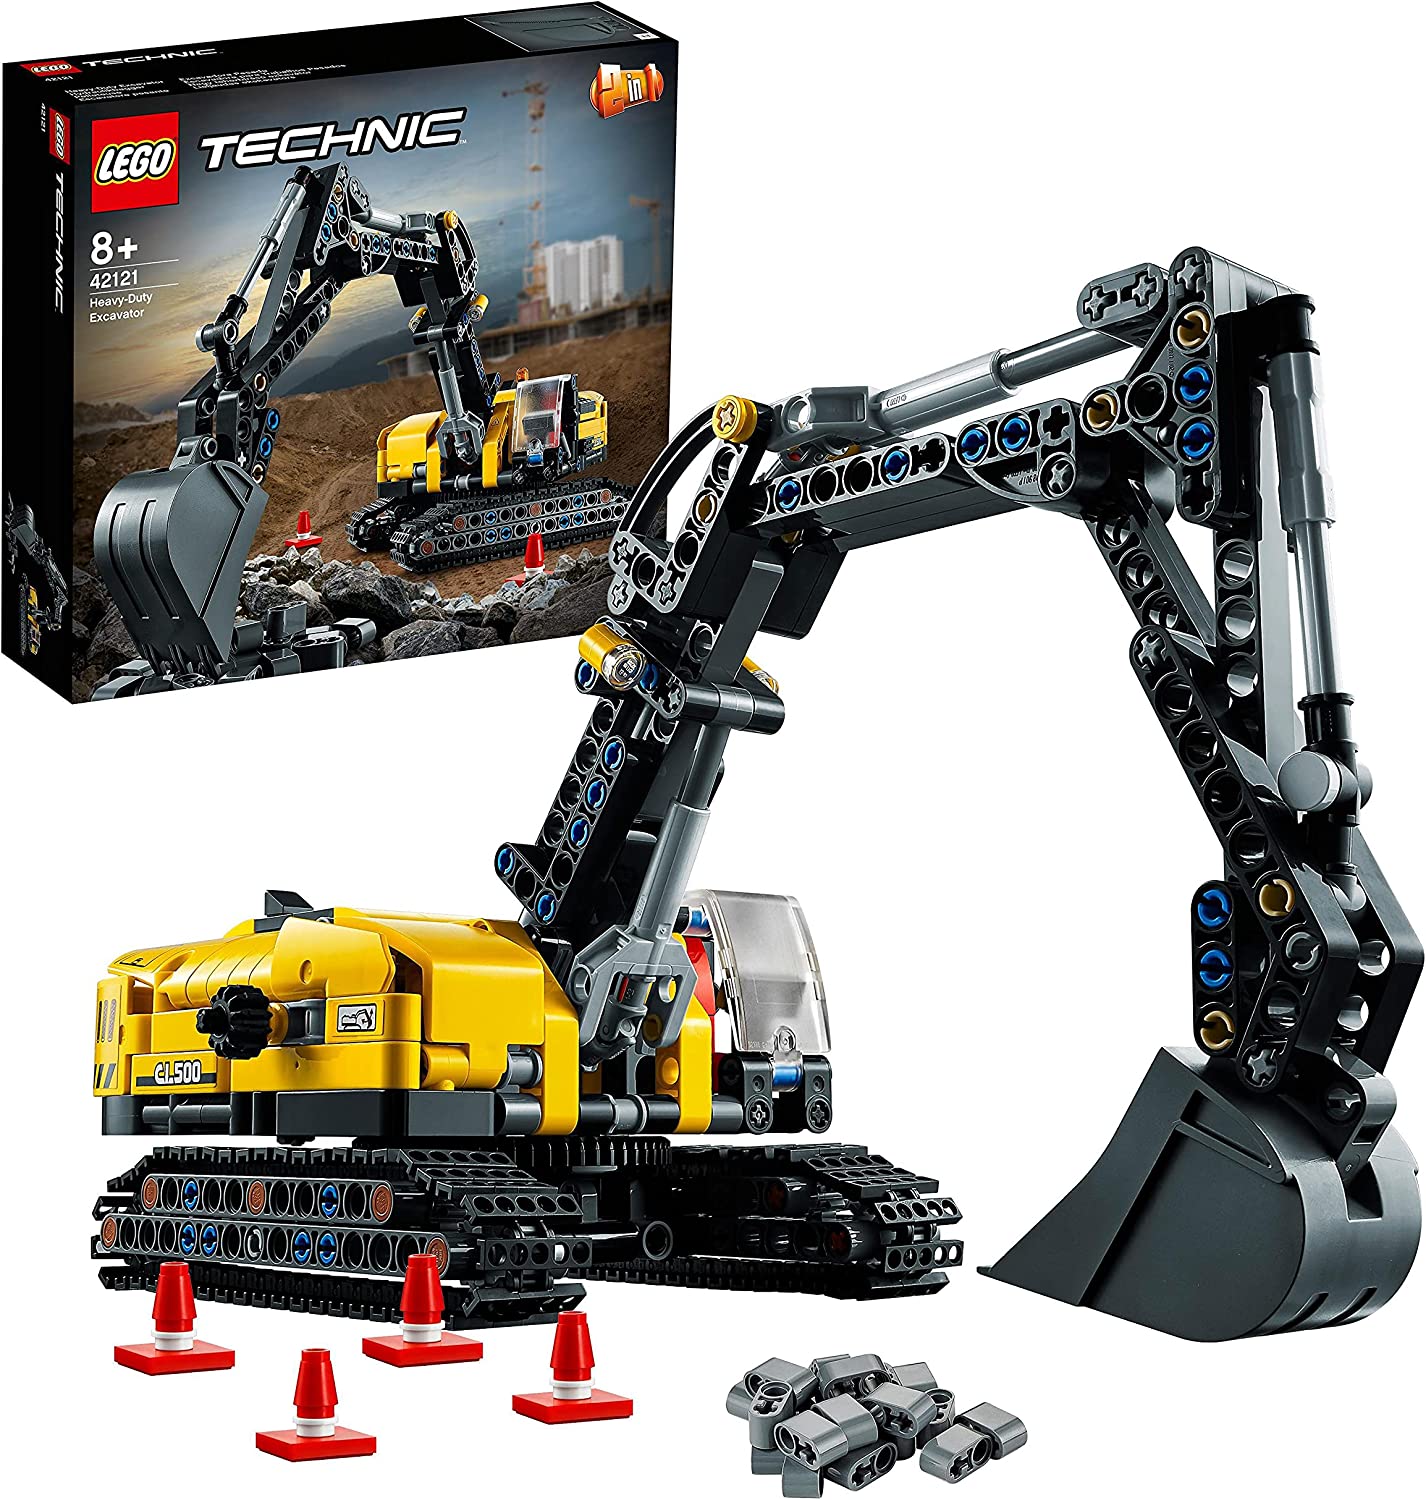 Lego 42121 technical hydraulic excavator construction kit, 2-in-1 model, construction vehicle, excavator toy from 8 years, construction toy